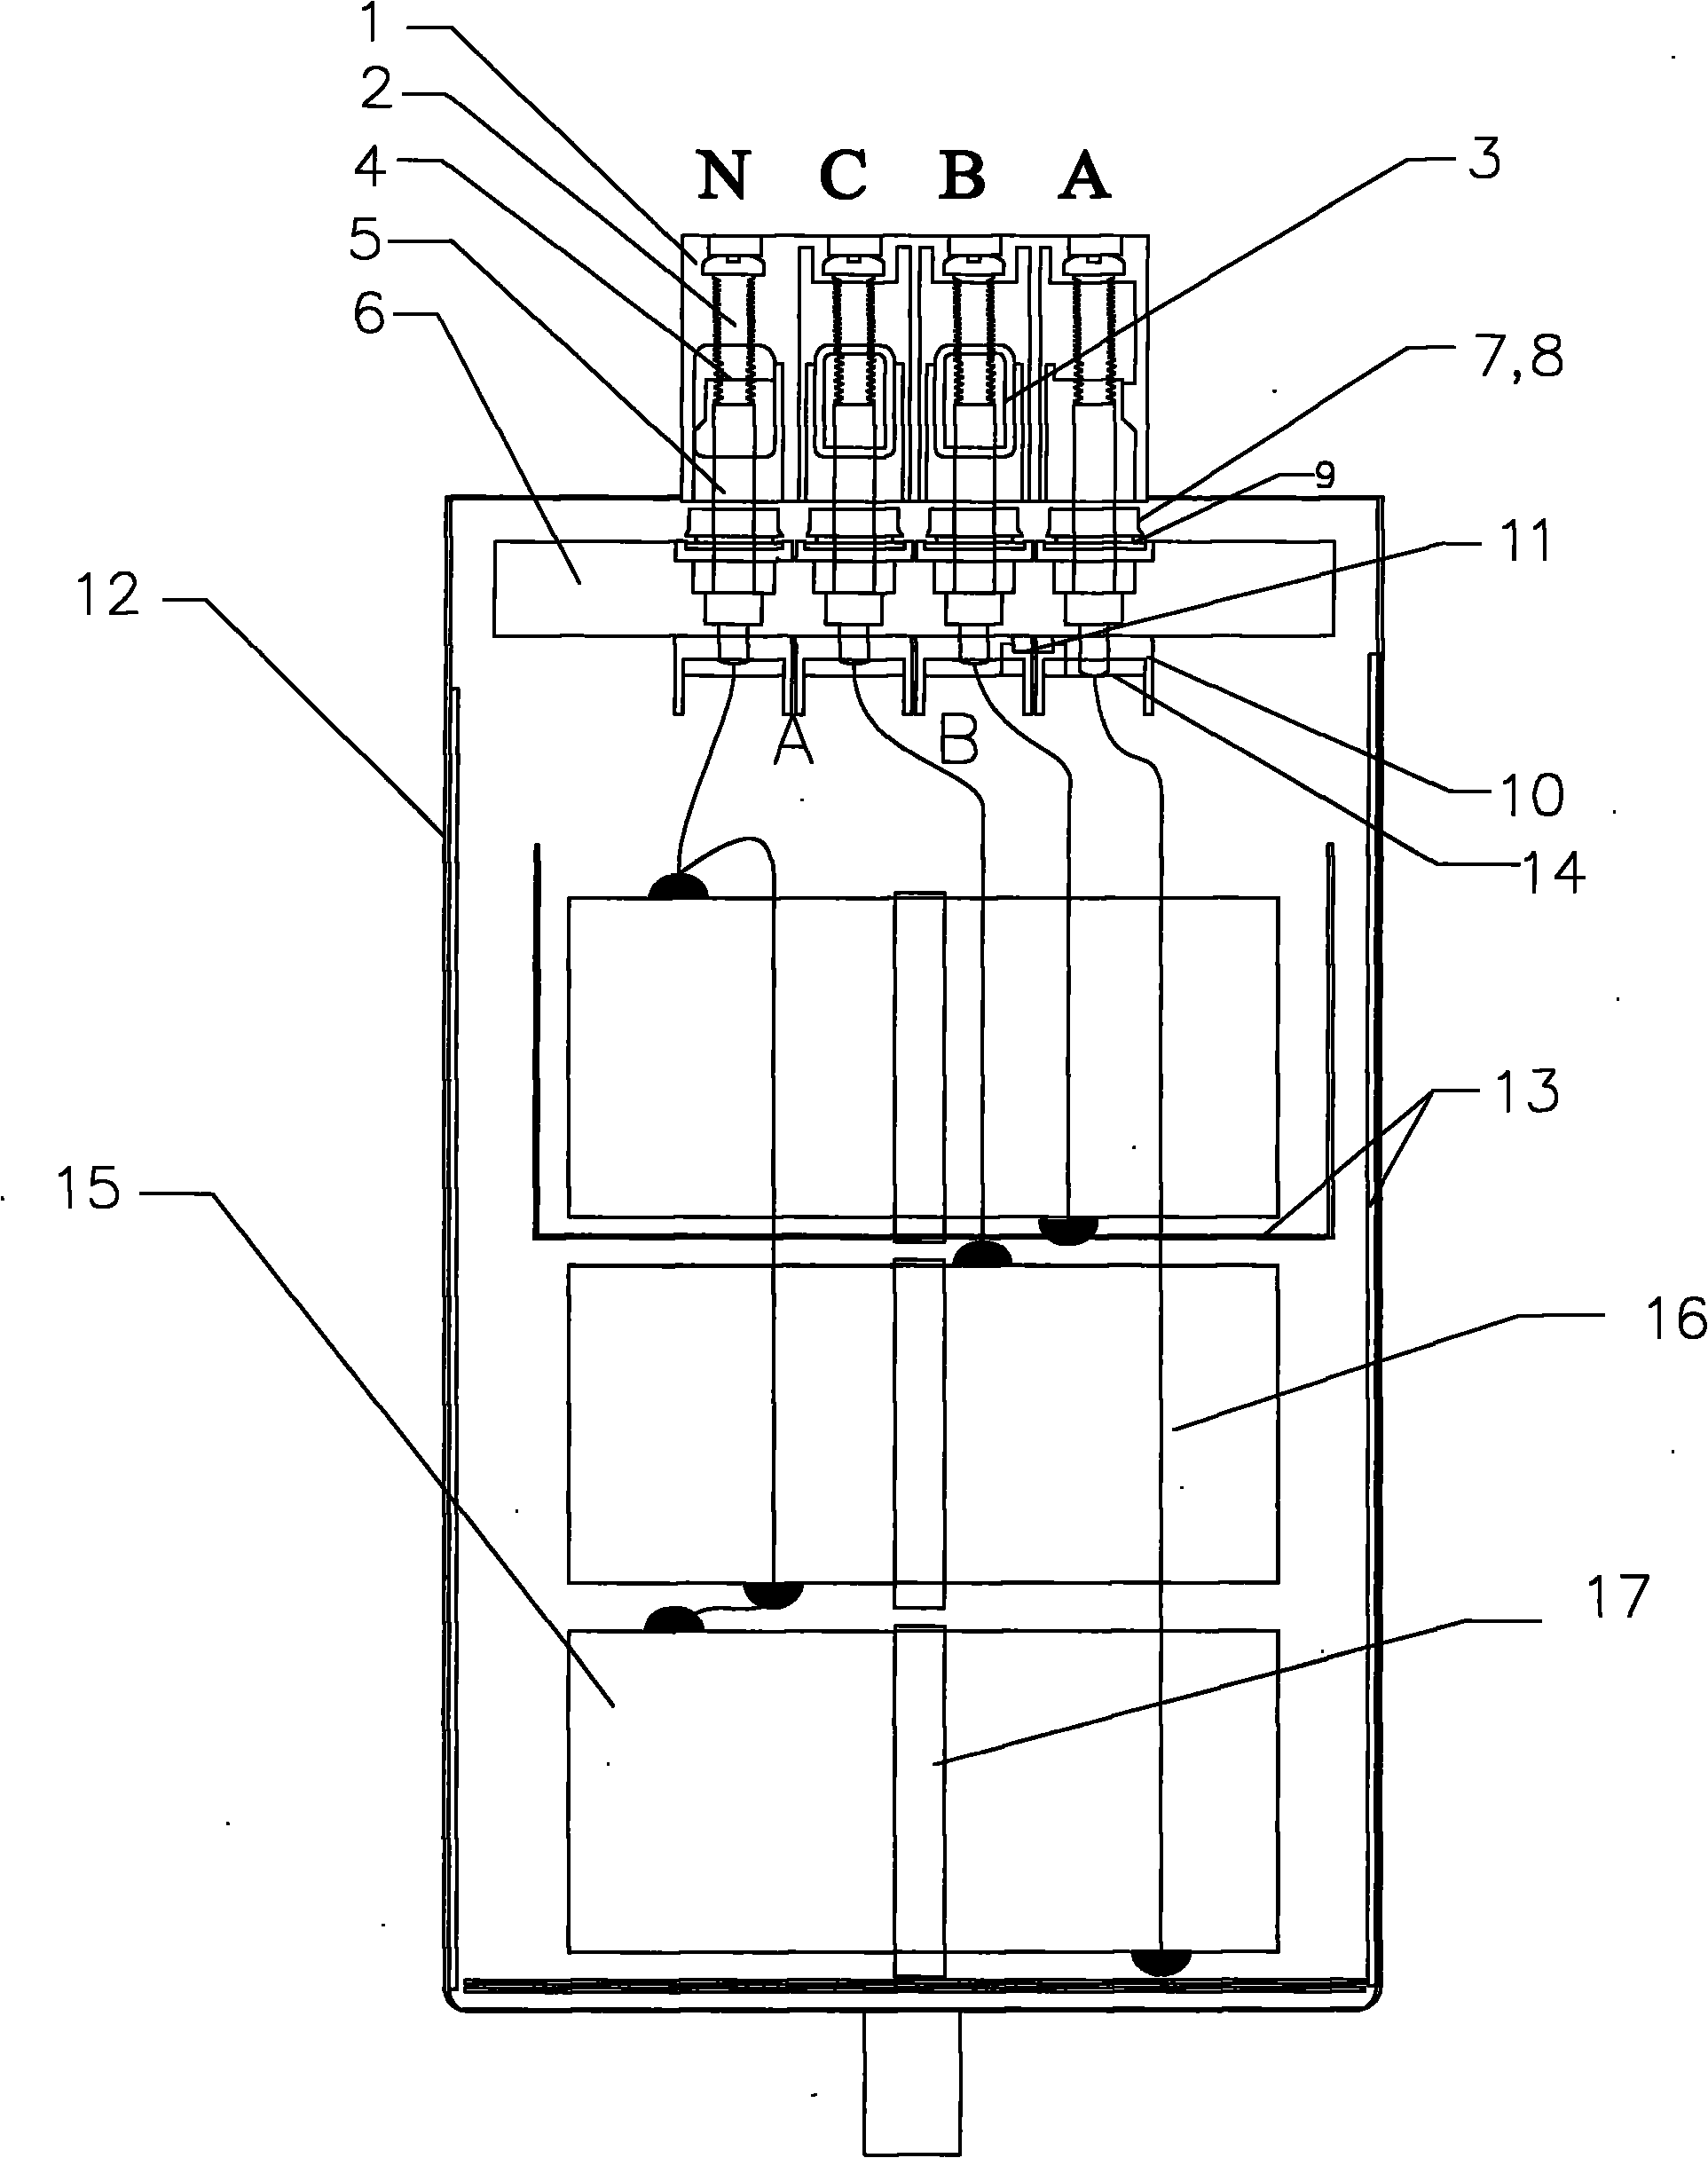 Split-phase compensation self-healing type reactive compensation capacitor